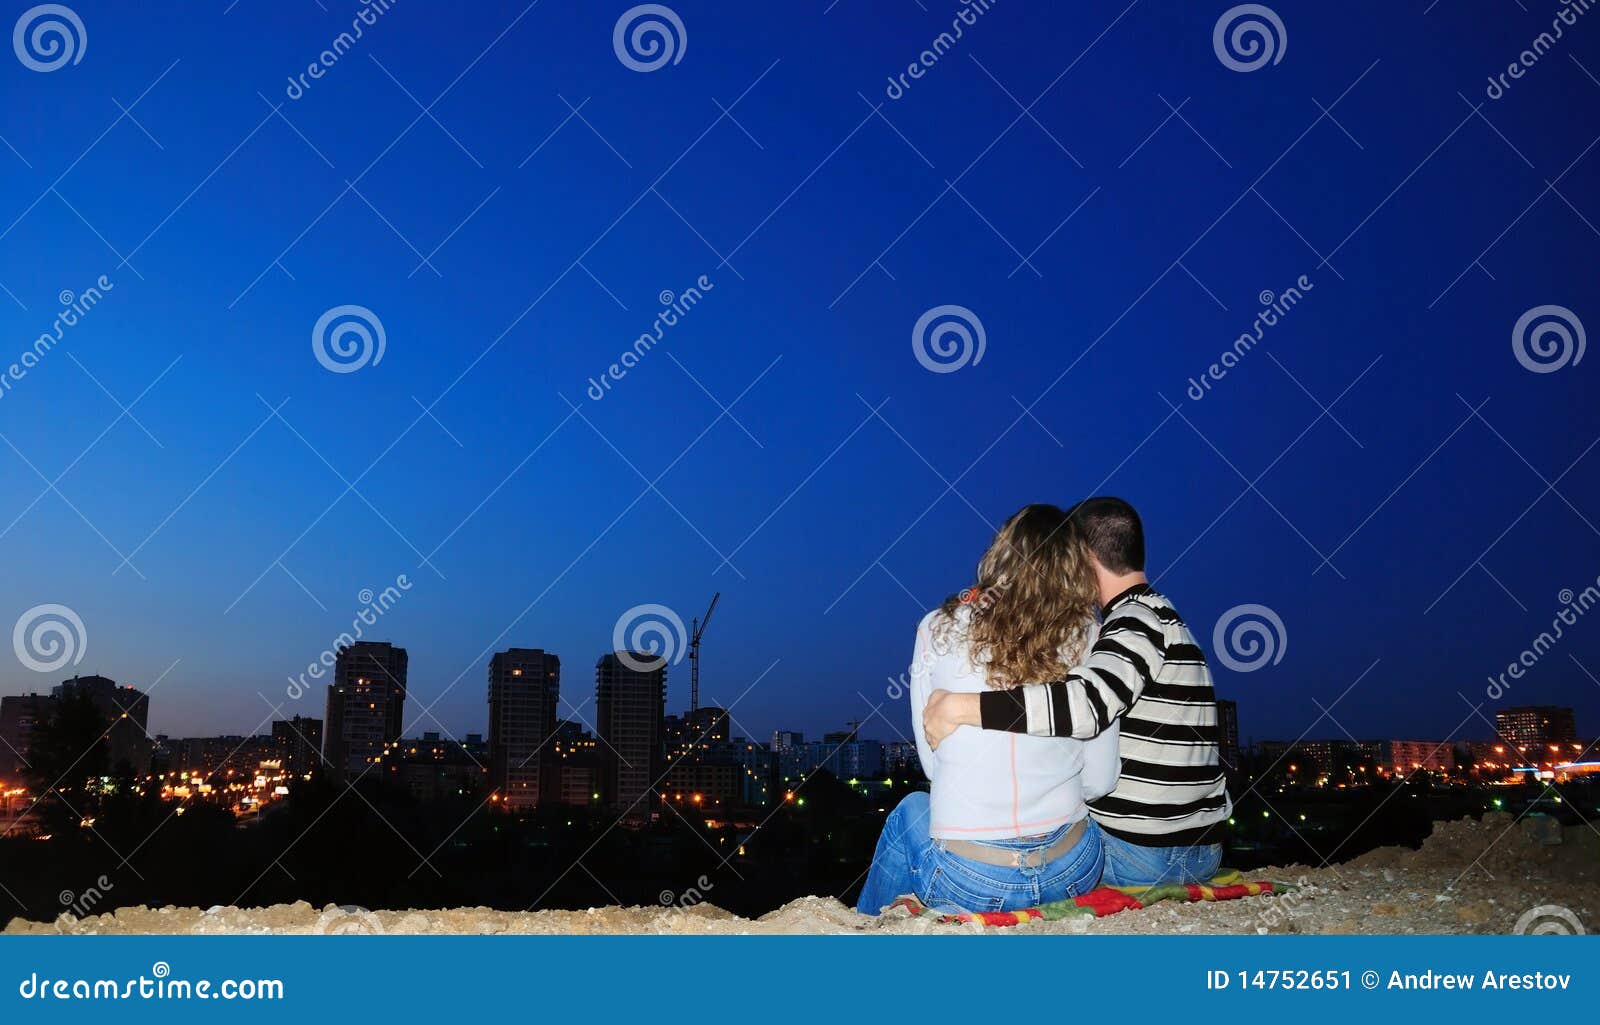 enamoured pair in a night city